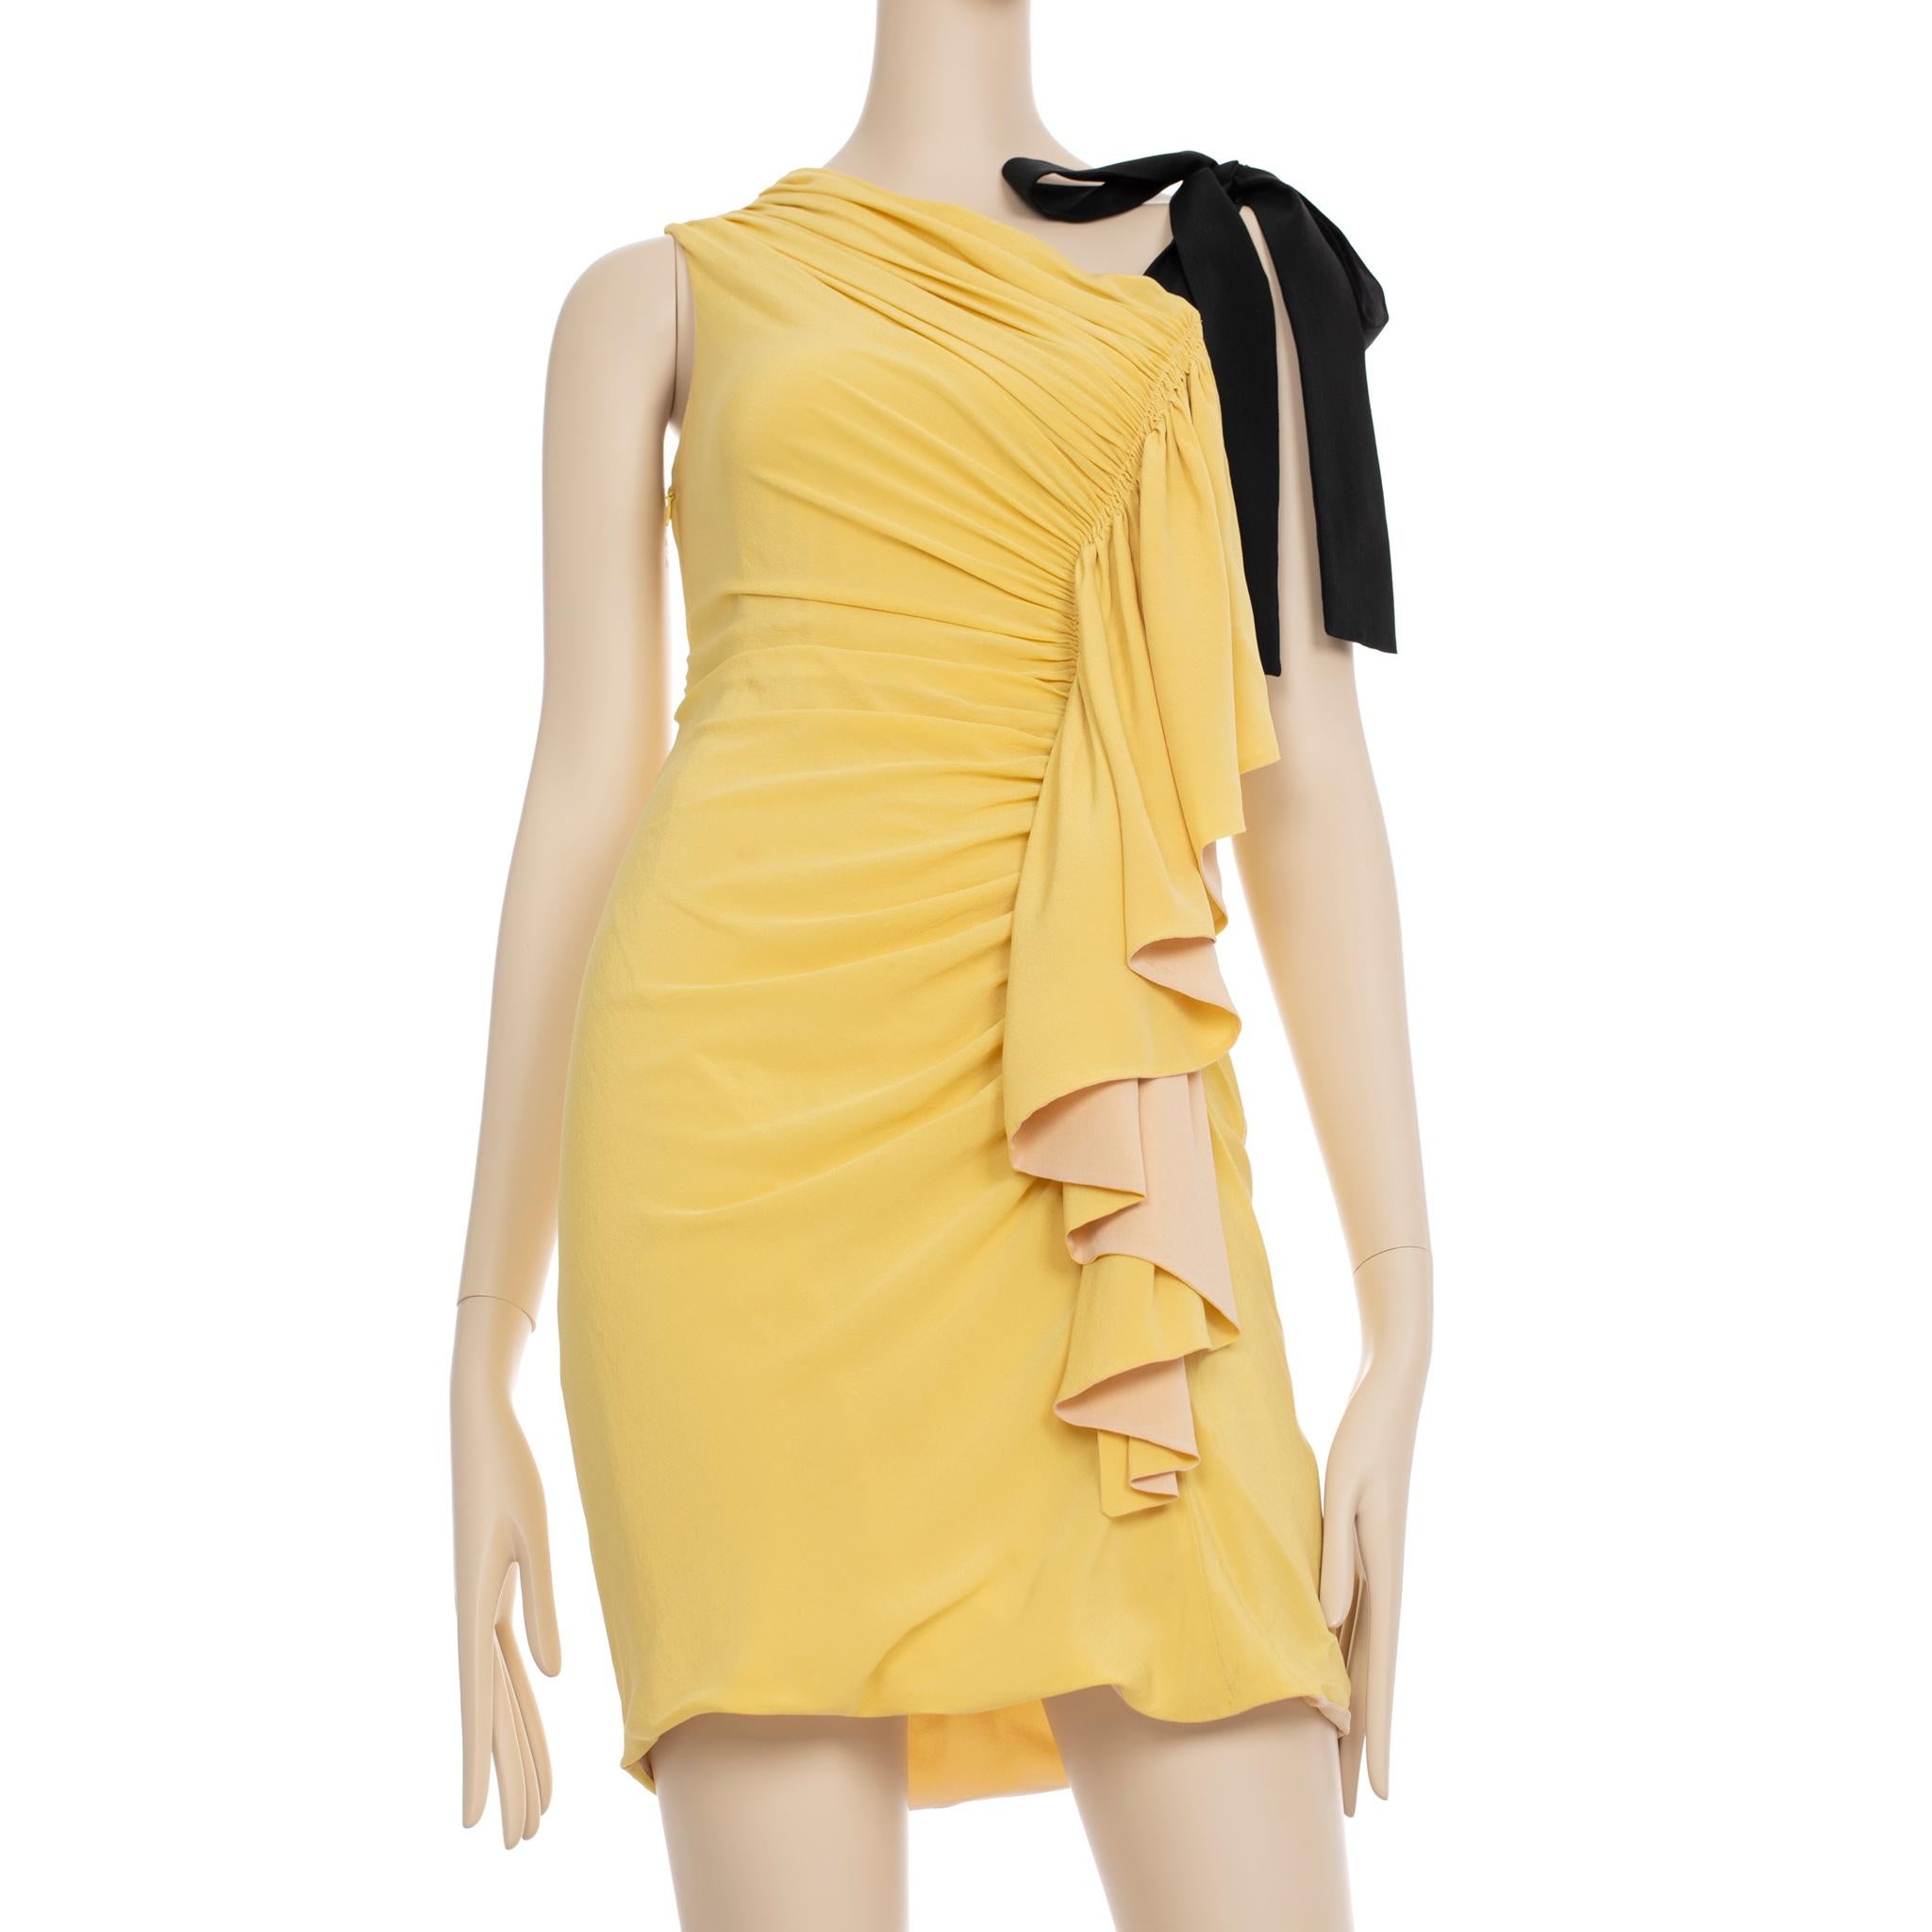 This elegant Fendi dress is crafted from two complementary shades of yellow and nude, with ruched details for subtle texture. Perfect for summer cocktail events, this stylish piece will make you stand out from the crowd.

Brand: Fendi

Product: